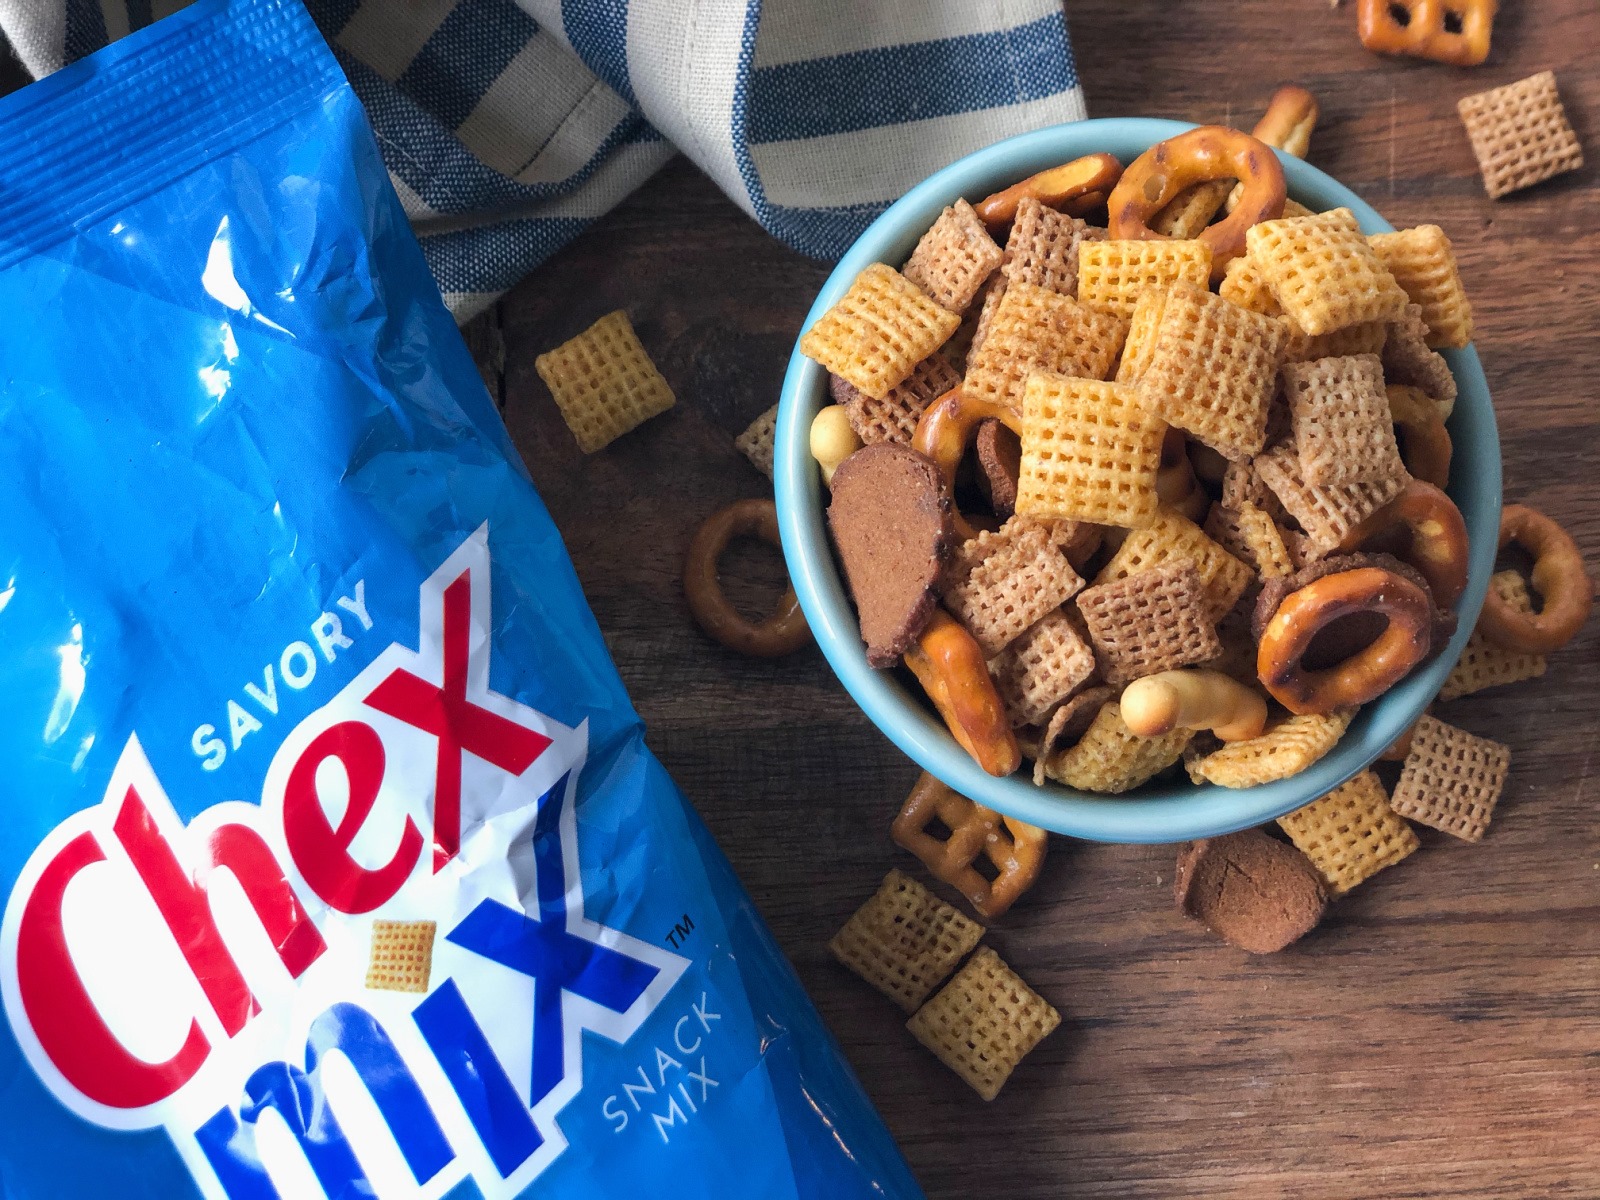 Chex Mix As Low As $1.86 Per Bag At Kroger